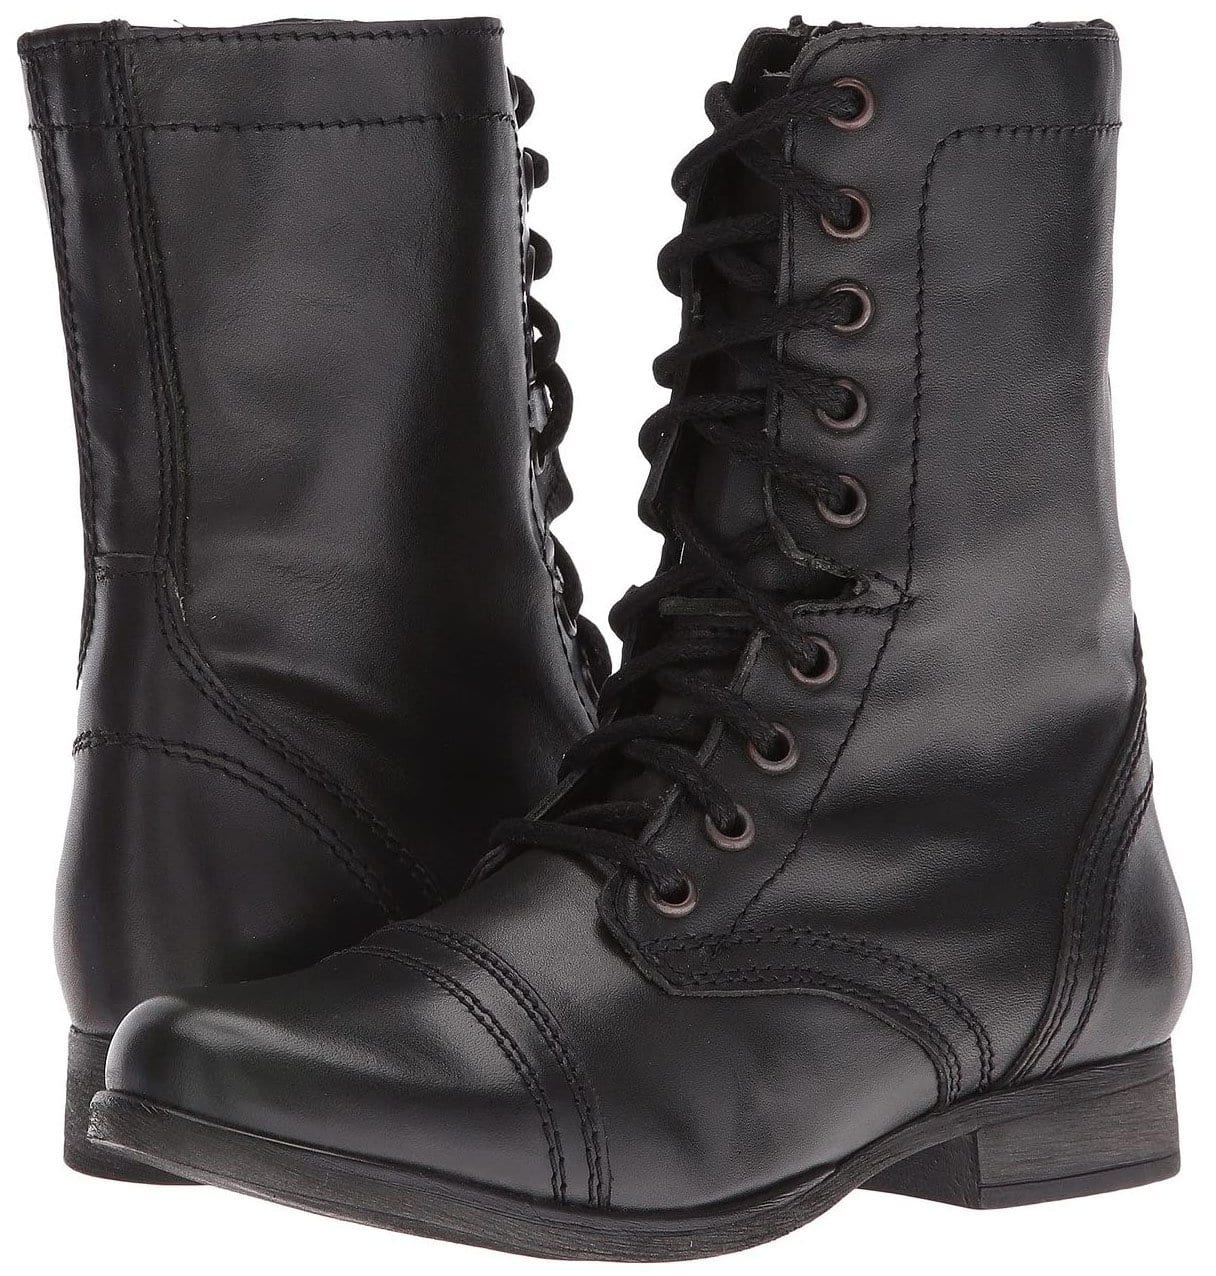 Get festival-ready and wear your denim dresses with Steve Madden combat boots